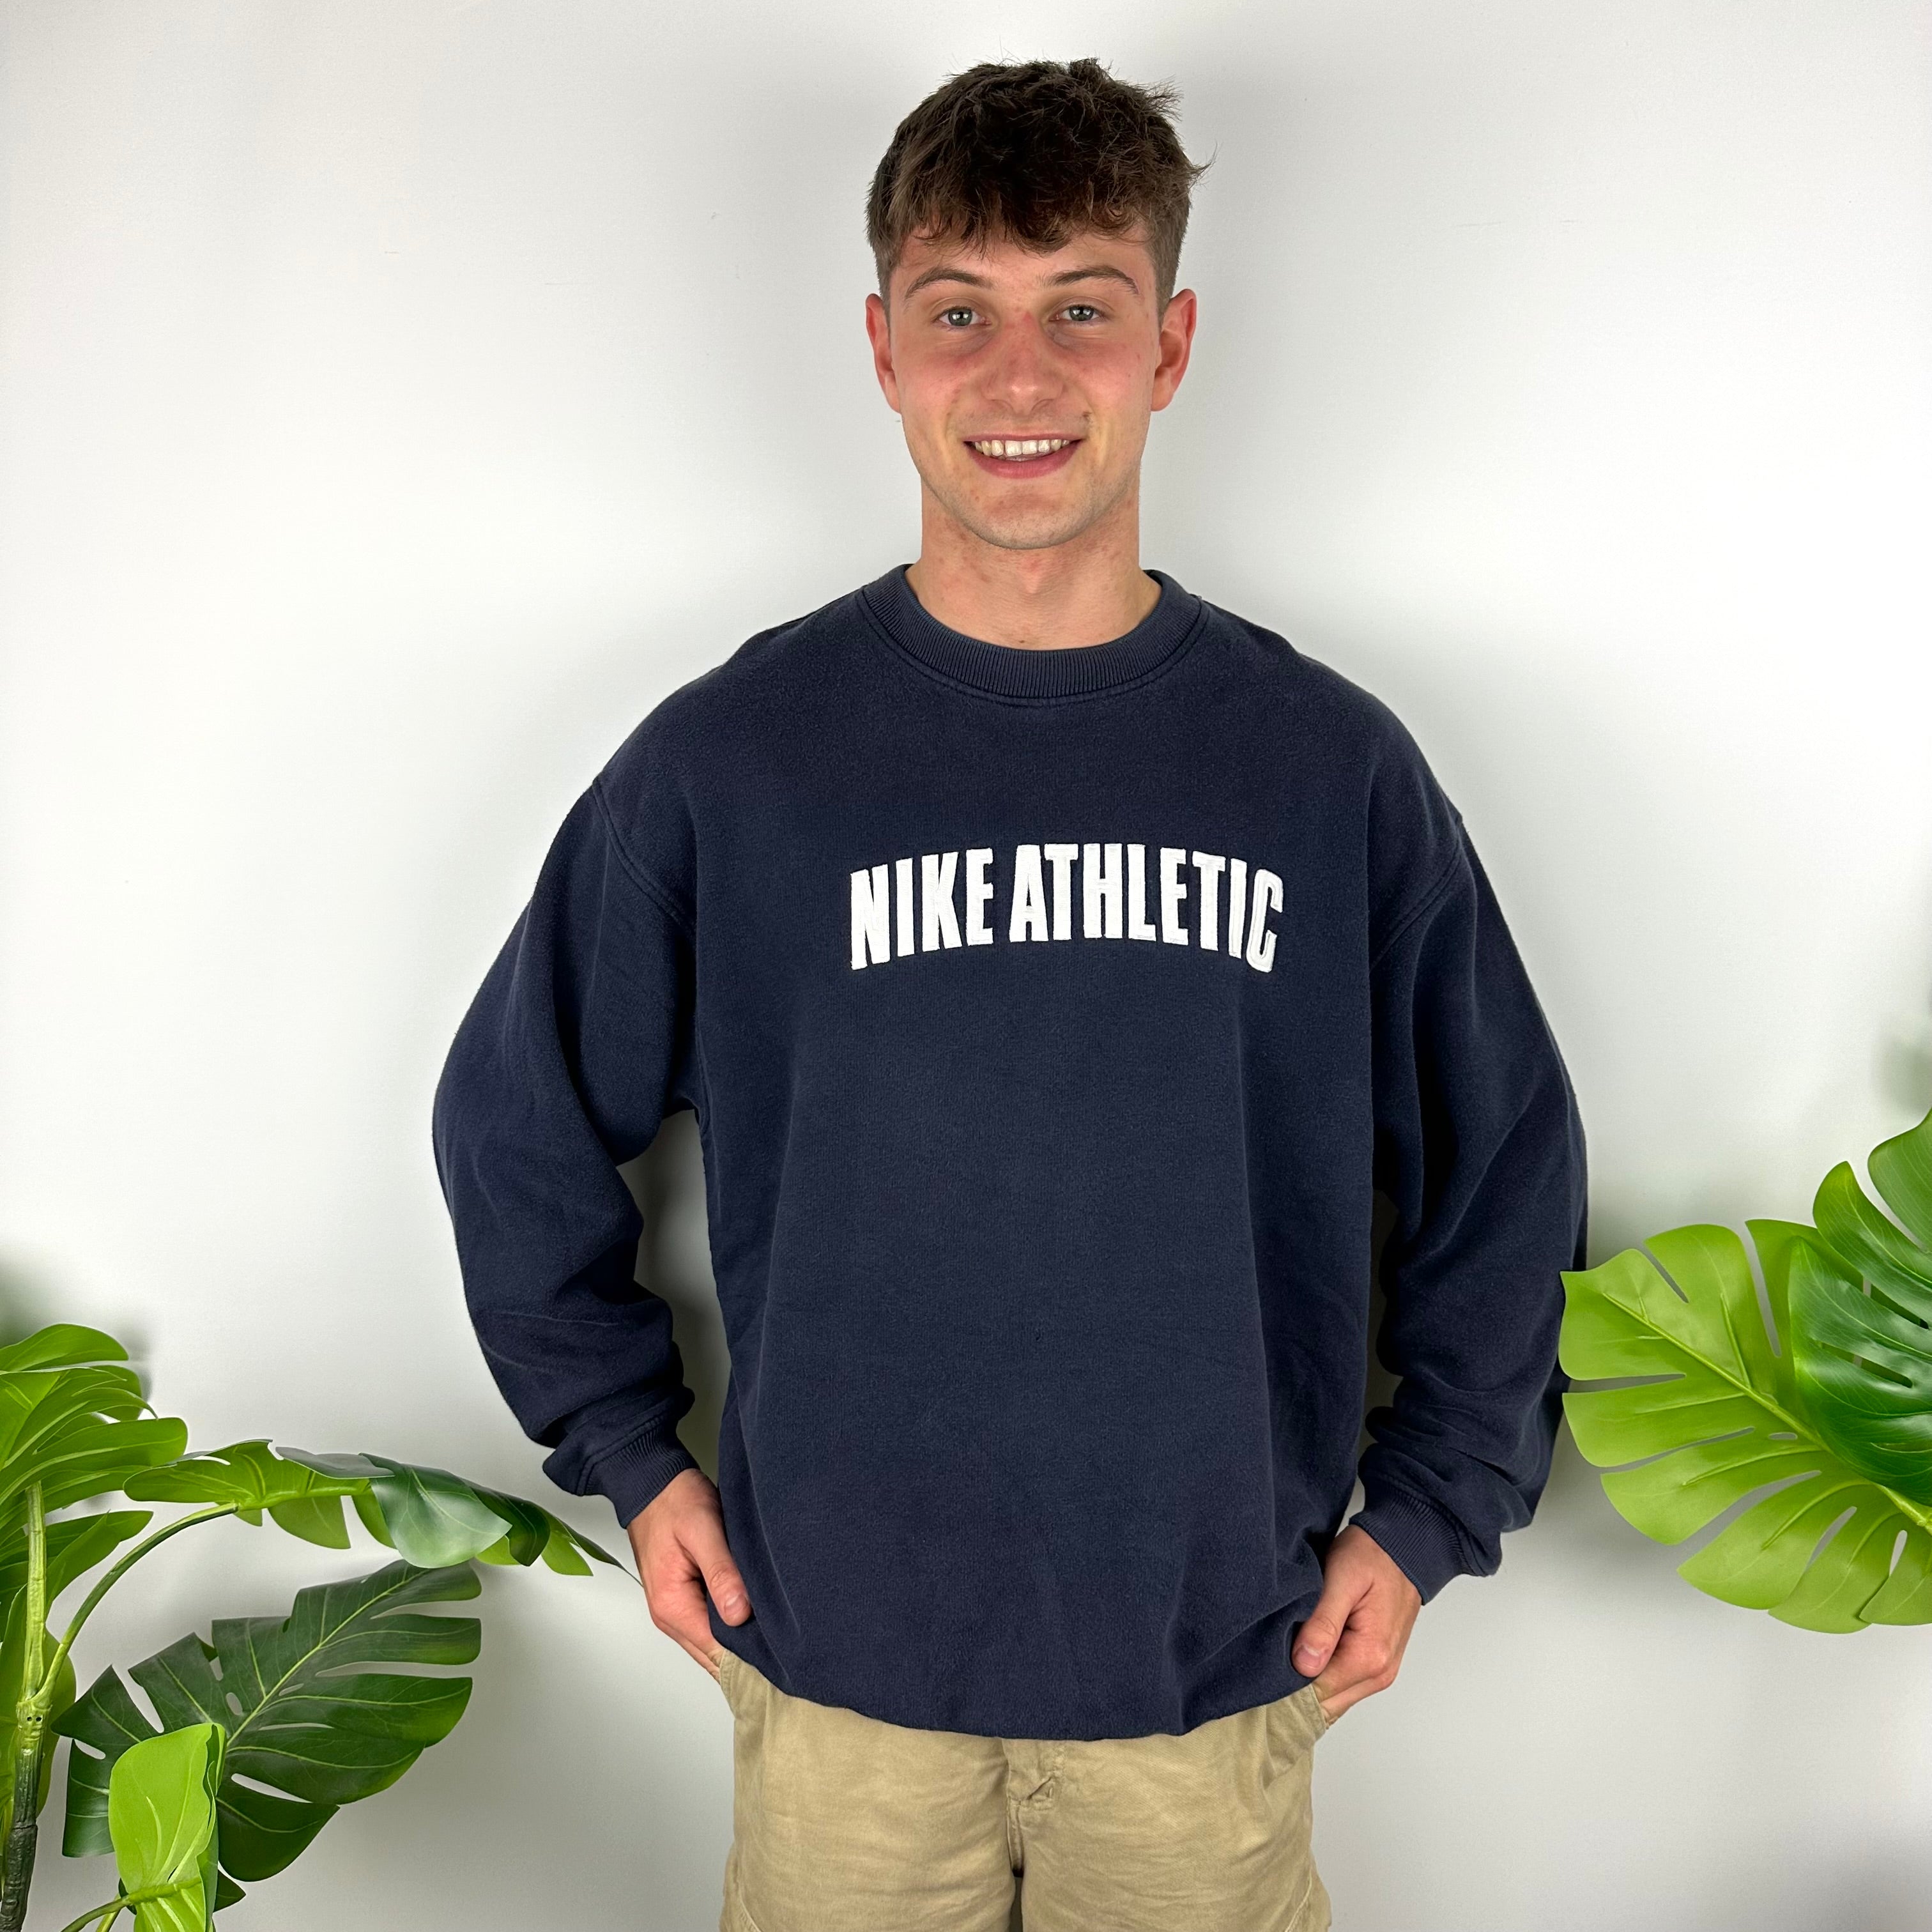 Nike Athletic Navy Embroidered Spell Out Sweatshirt (XL)